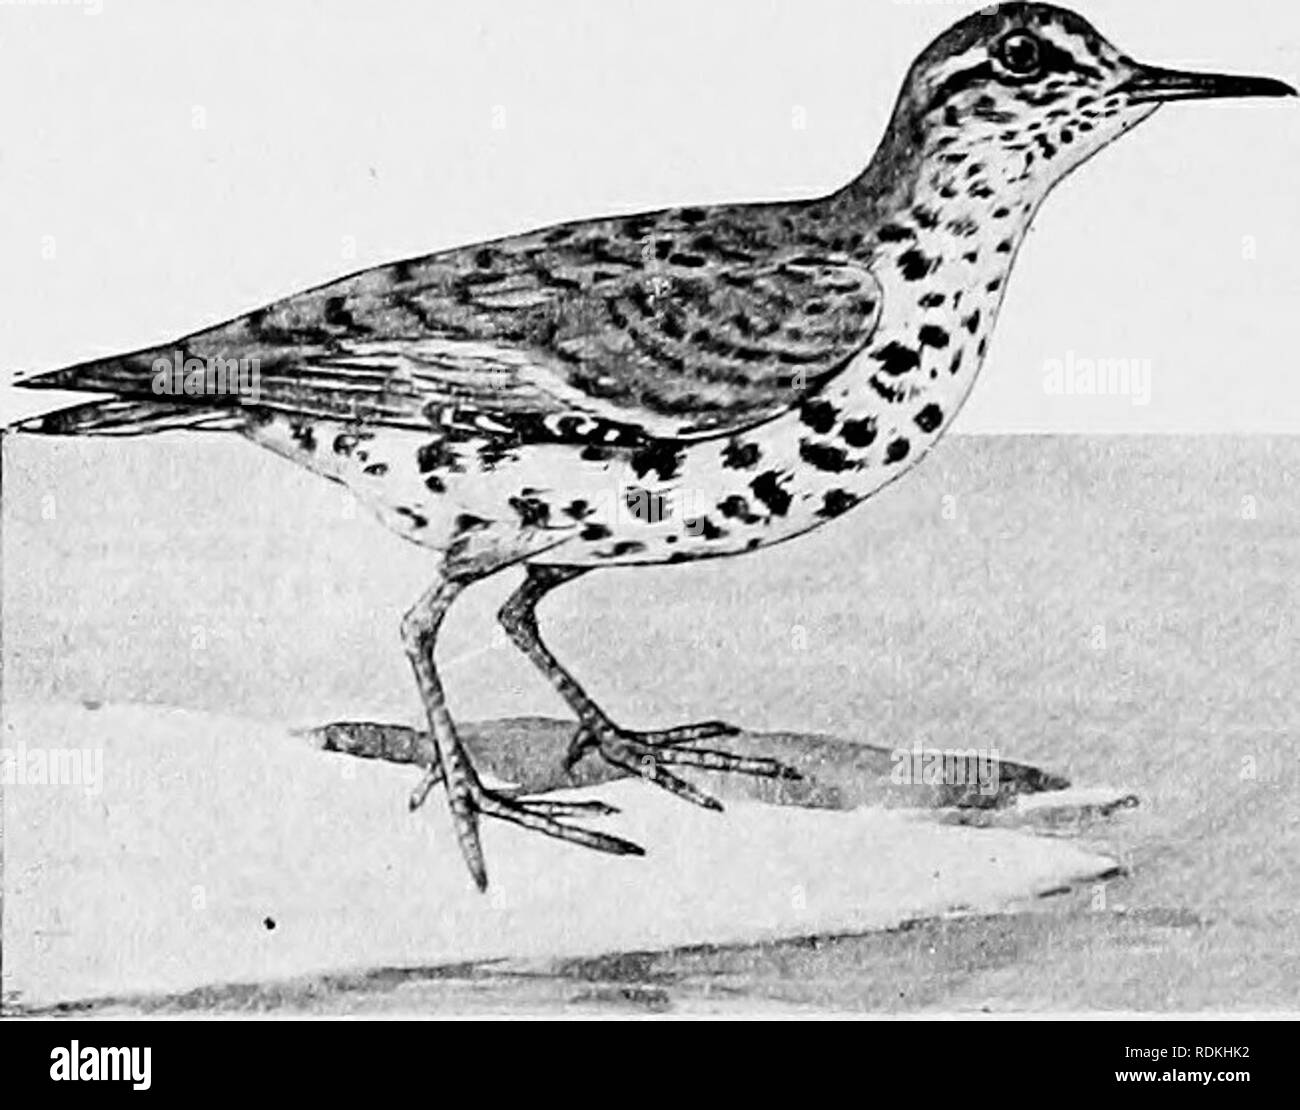 . The birds of Illinois and Wisconsin. Birds; Birds. 420 Field Museum of Natural History—Zoology, Vol. IX. Calumet Lake, Cook Co., 111., Sept. 1898. (The Auk, Vol. XVI, 1899, p. 276.) It has occasionally been taken in Wisconsin, but Kumlien and Hollister consider it a &quot;rare migrant.&quot; Genus ACTITIS Illiger. 130. Actitis macularia (Linn.) . Spotted Sandpiper. Distr.: North and South America, from Alaska to the West Indies, Middle America and Brazil; breeds throughout temperate North America. Adult in summer: Top of the head and back, olive green, showing bronzy reflections when held in Stock Photo